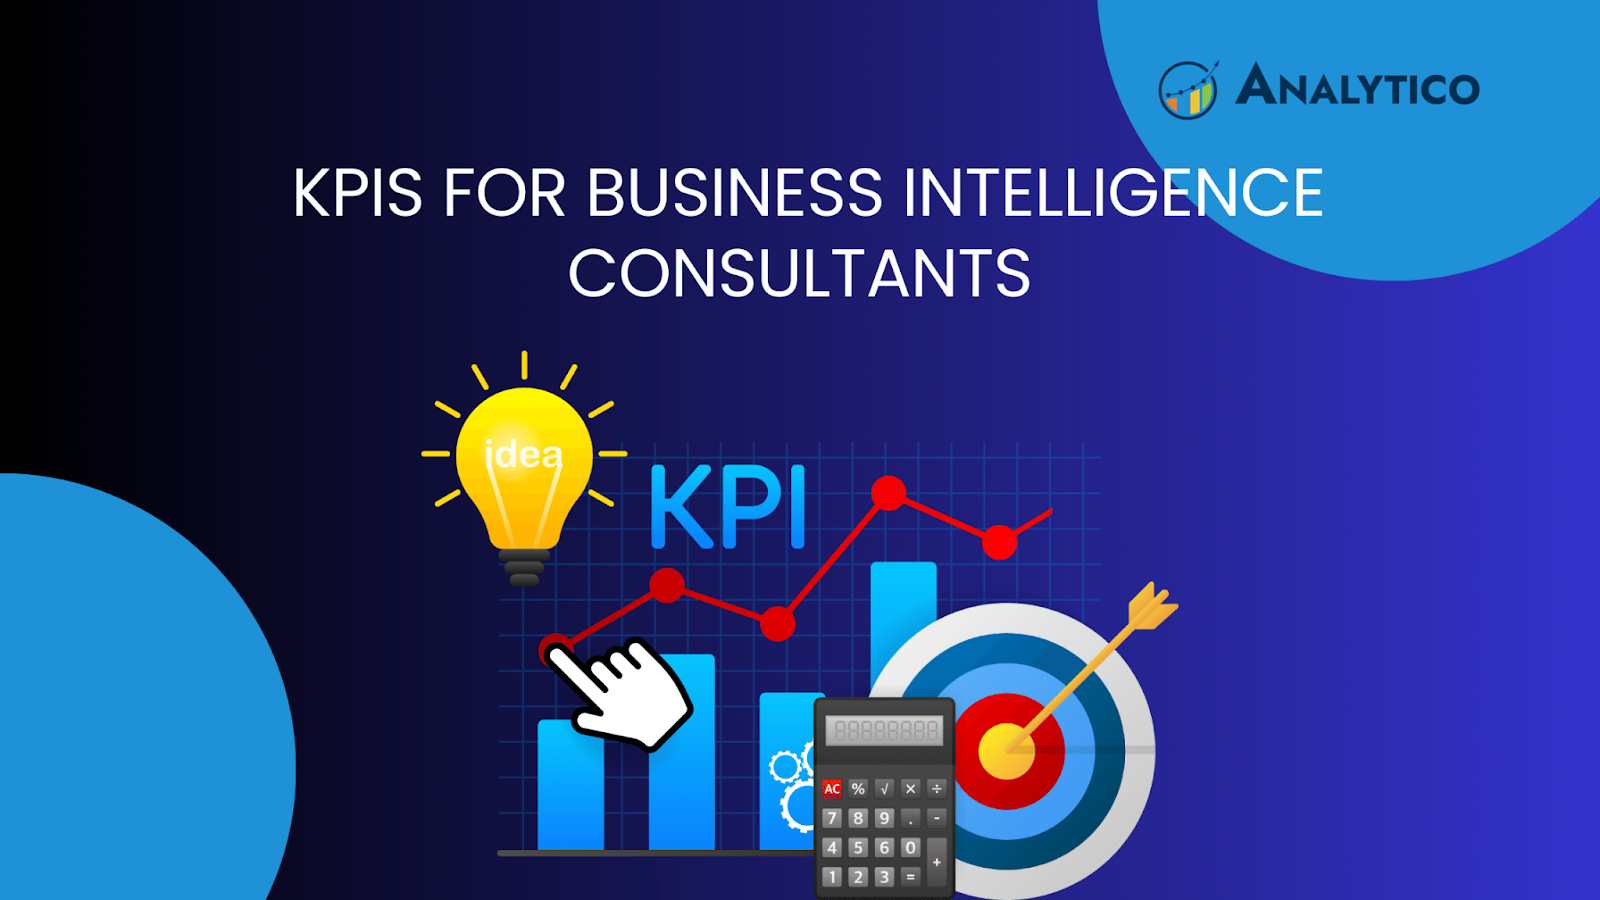 KPIs for Business Intelligence Consultants